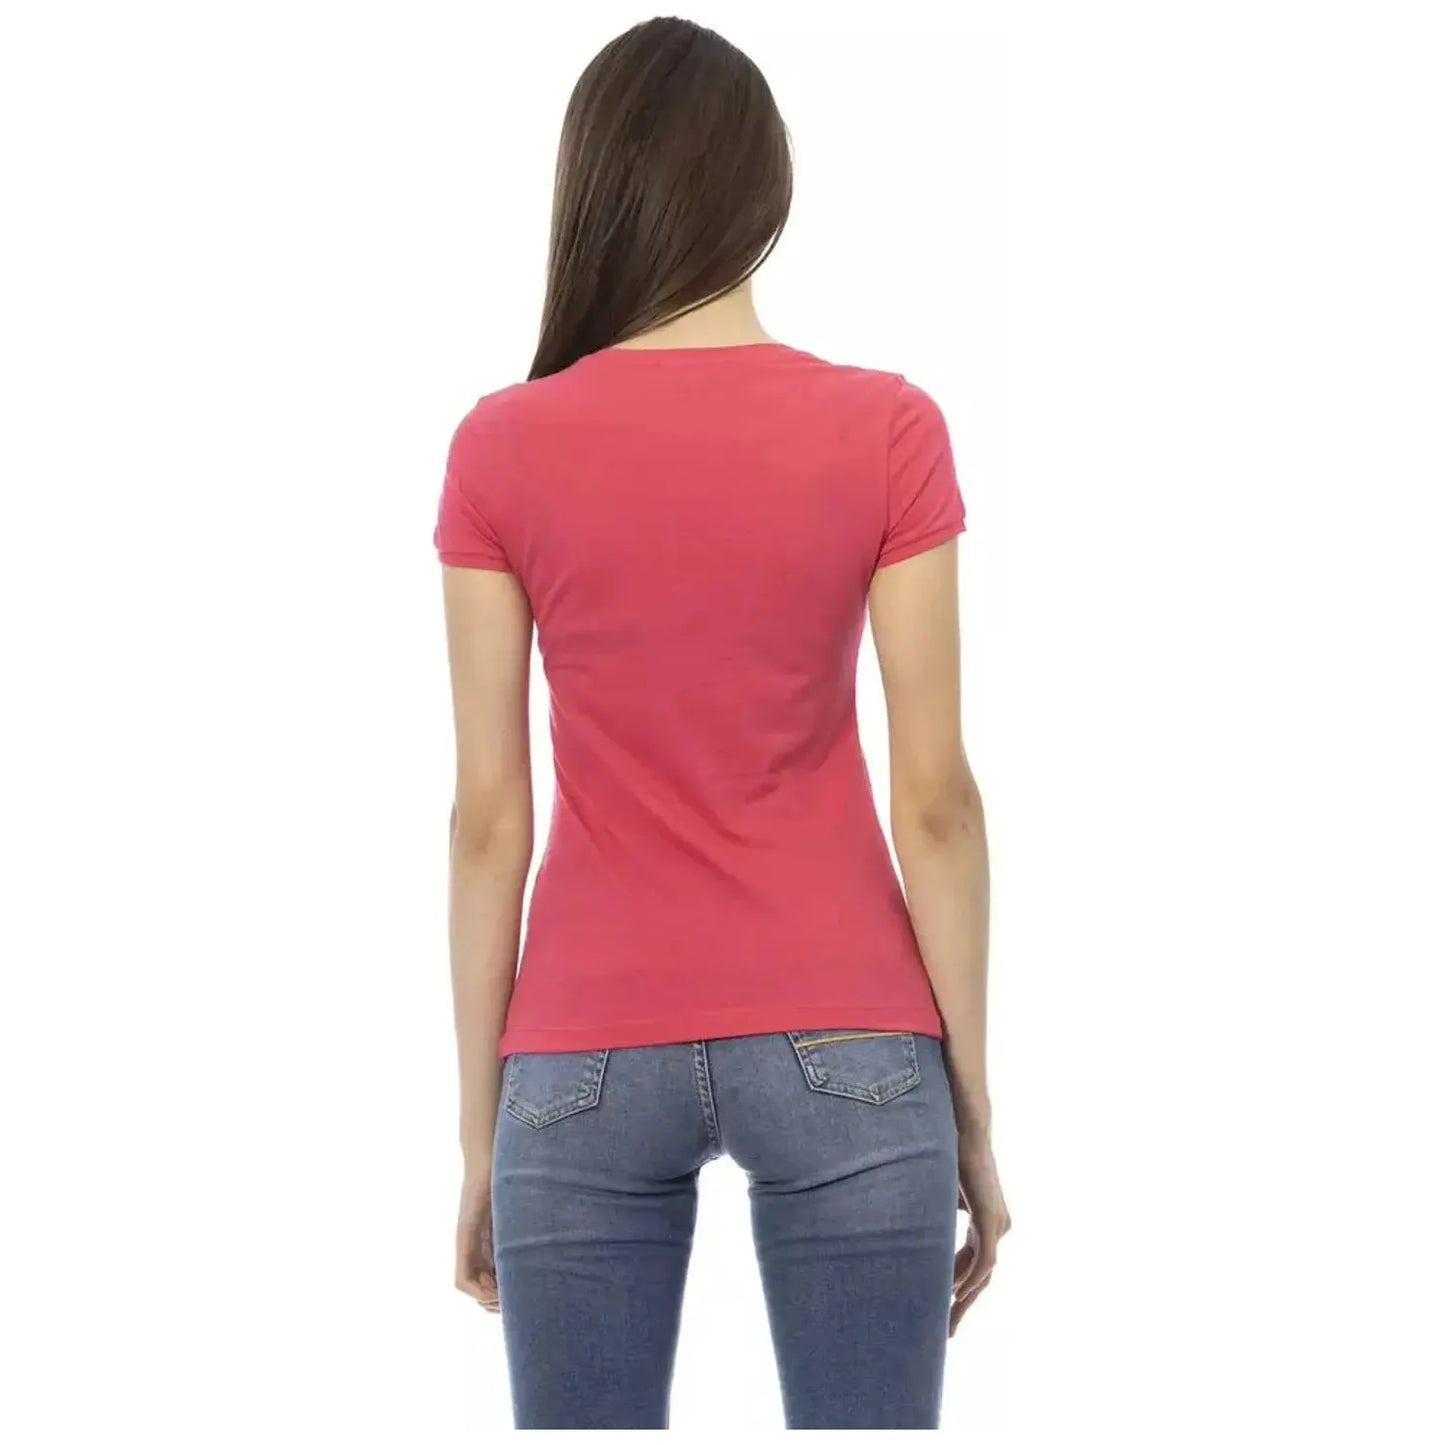 Trussardi Action V-Neck Cotton Blend Tee with Chic Front Print pink-cotton-tops-t-shirt-43